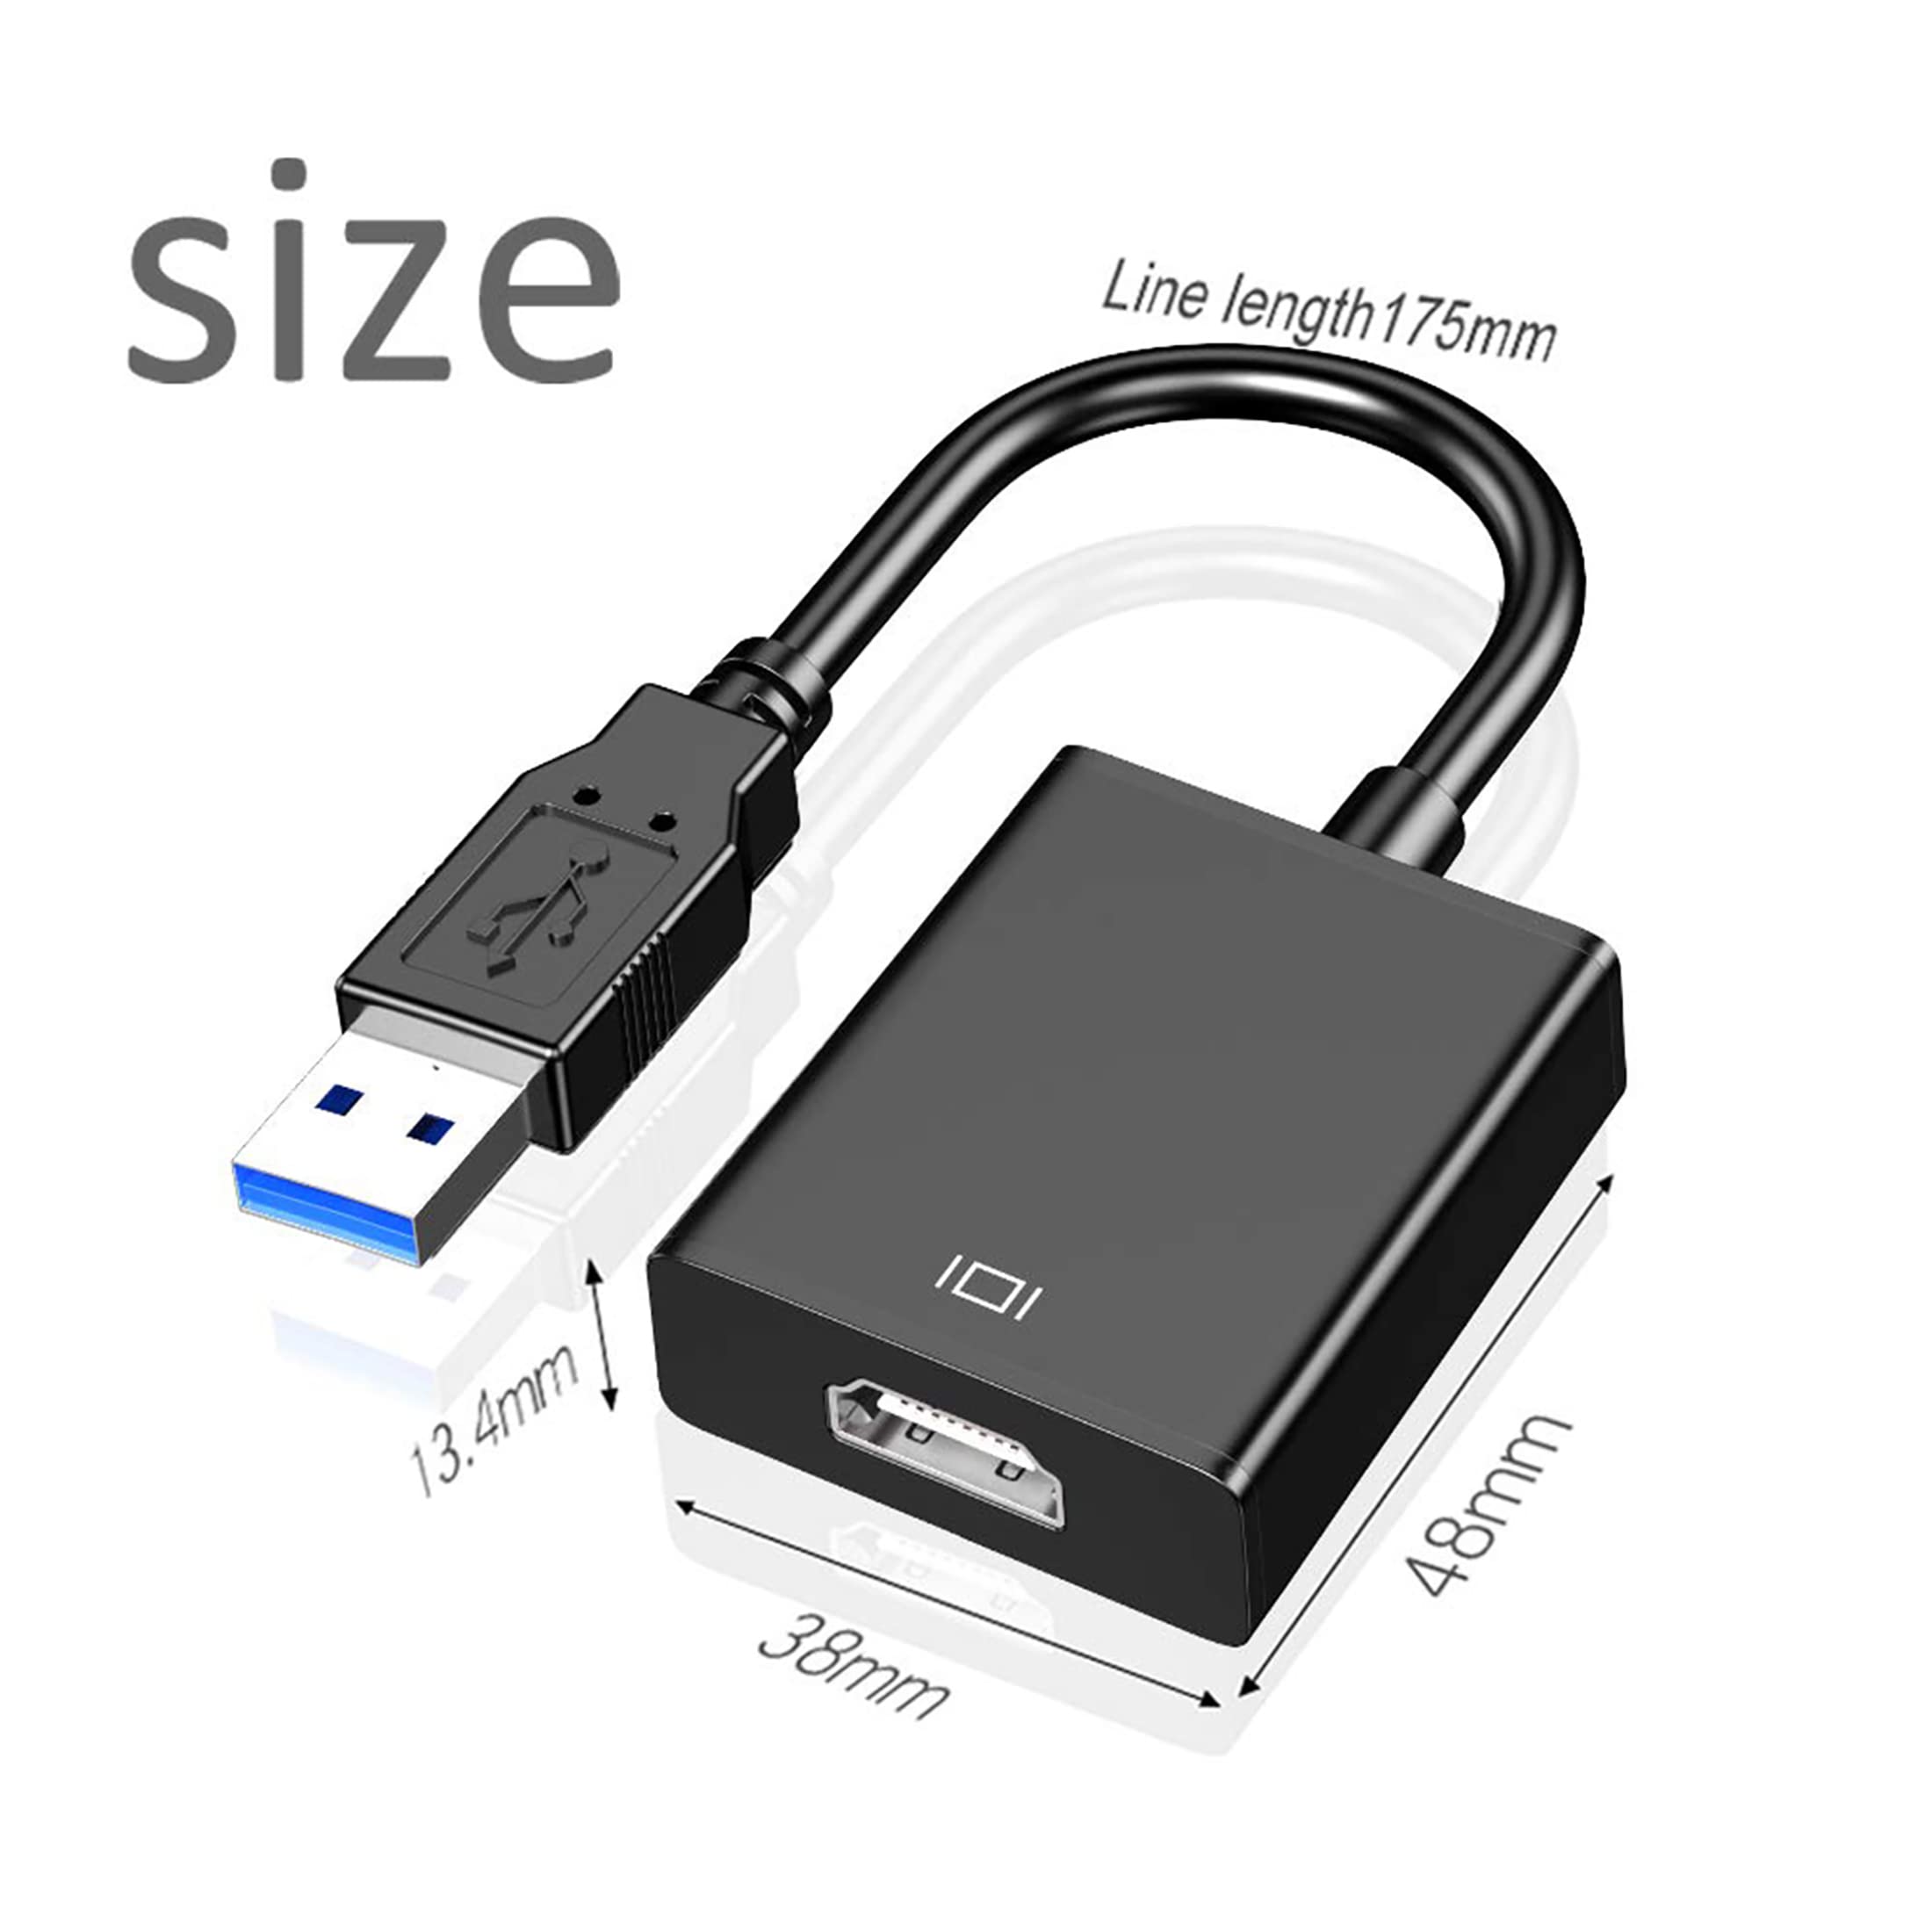 Zulpunur USB to HDMI Adapter, USB 3.0/2.0 to HDMI Cable Multi-Display Video Converter- PC Laptop Windows 7 8 10,Desktop, Laptop, PC, Monitor, Projector, HDTV.[Not Support Chromebook]